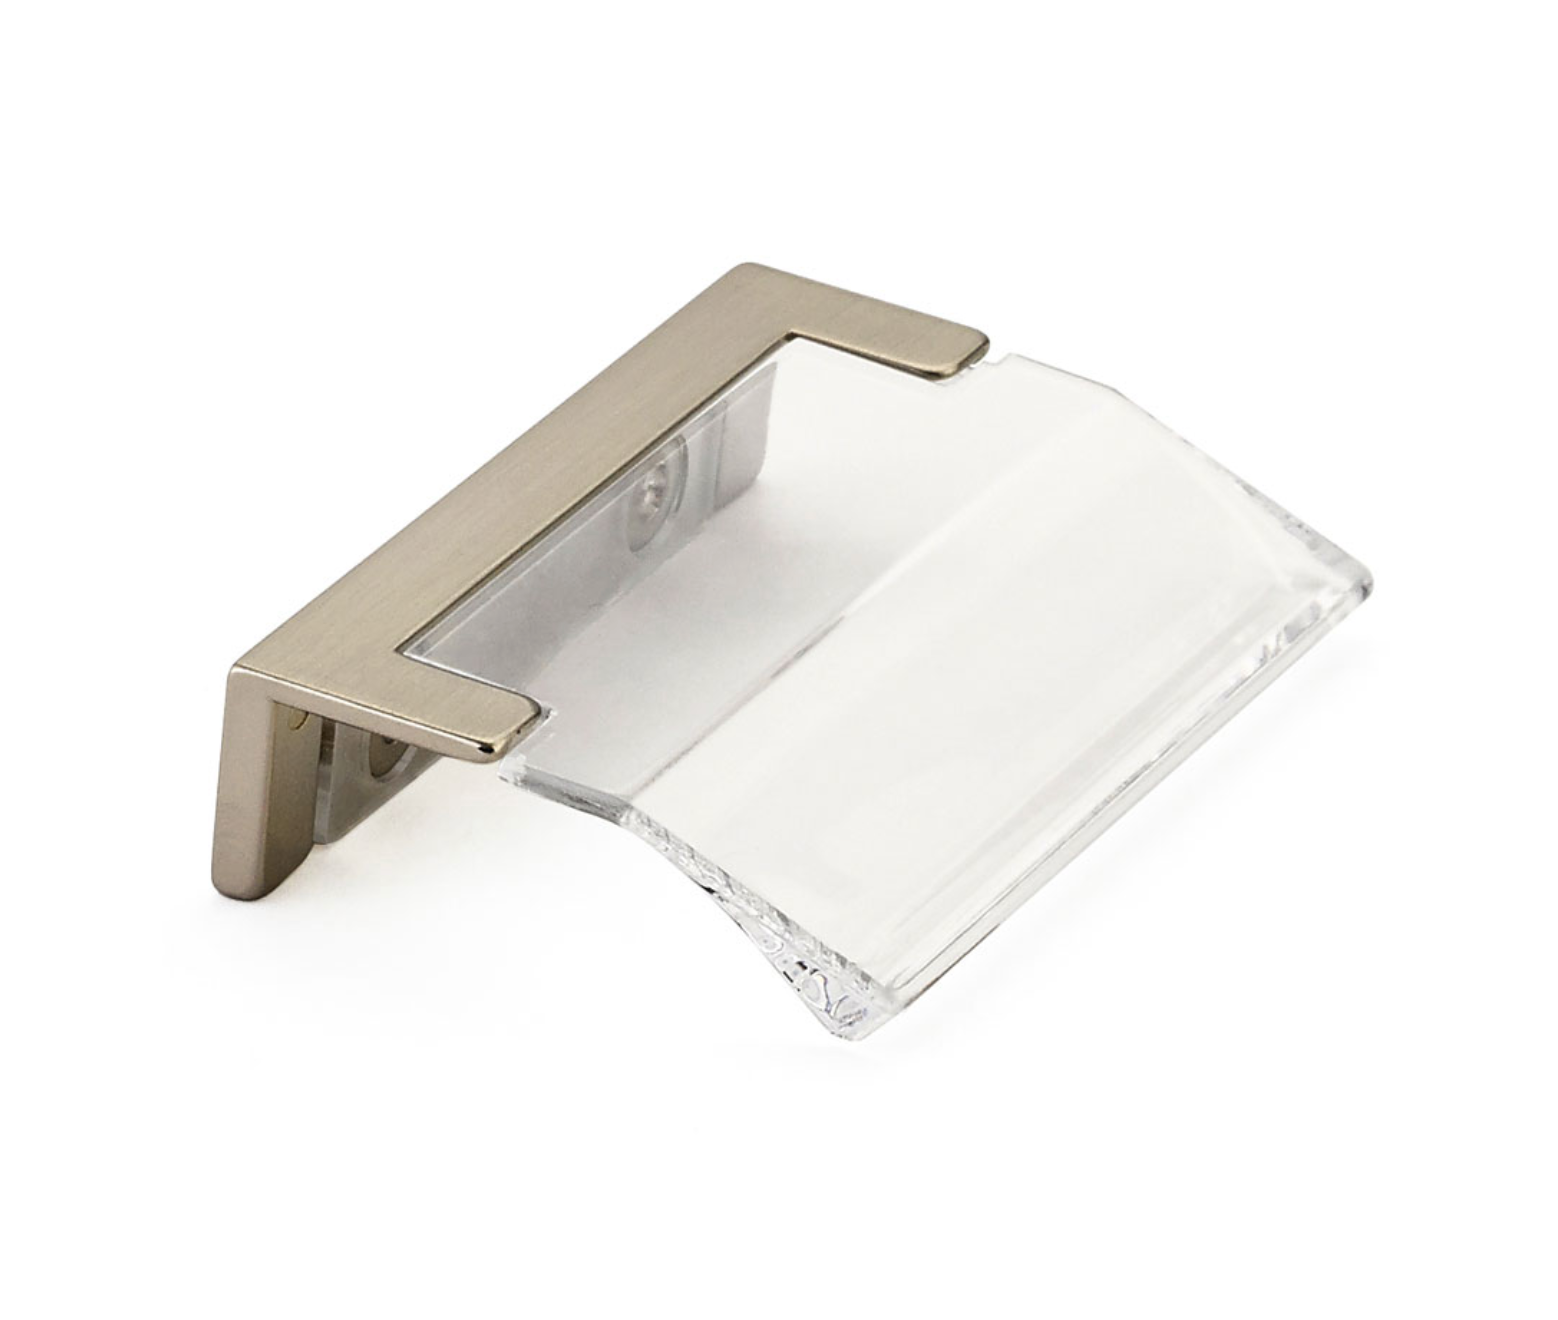 Satin Nickel "Ponce" Clear Glass Edge Drawer Pull - Industry Hardware